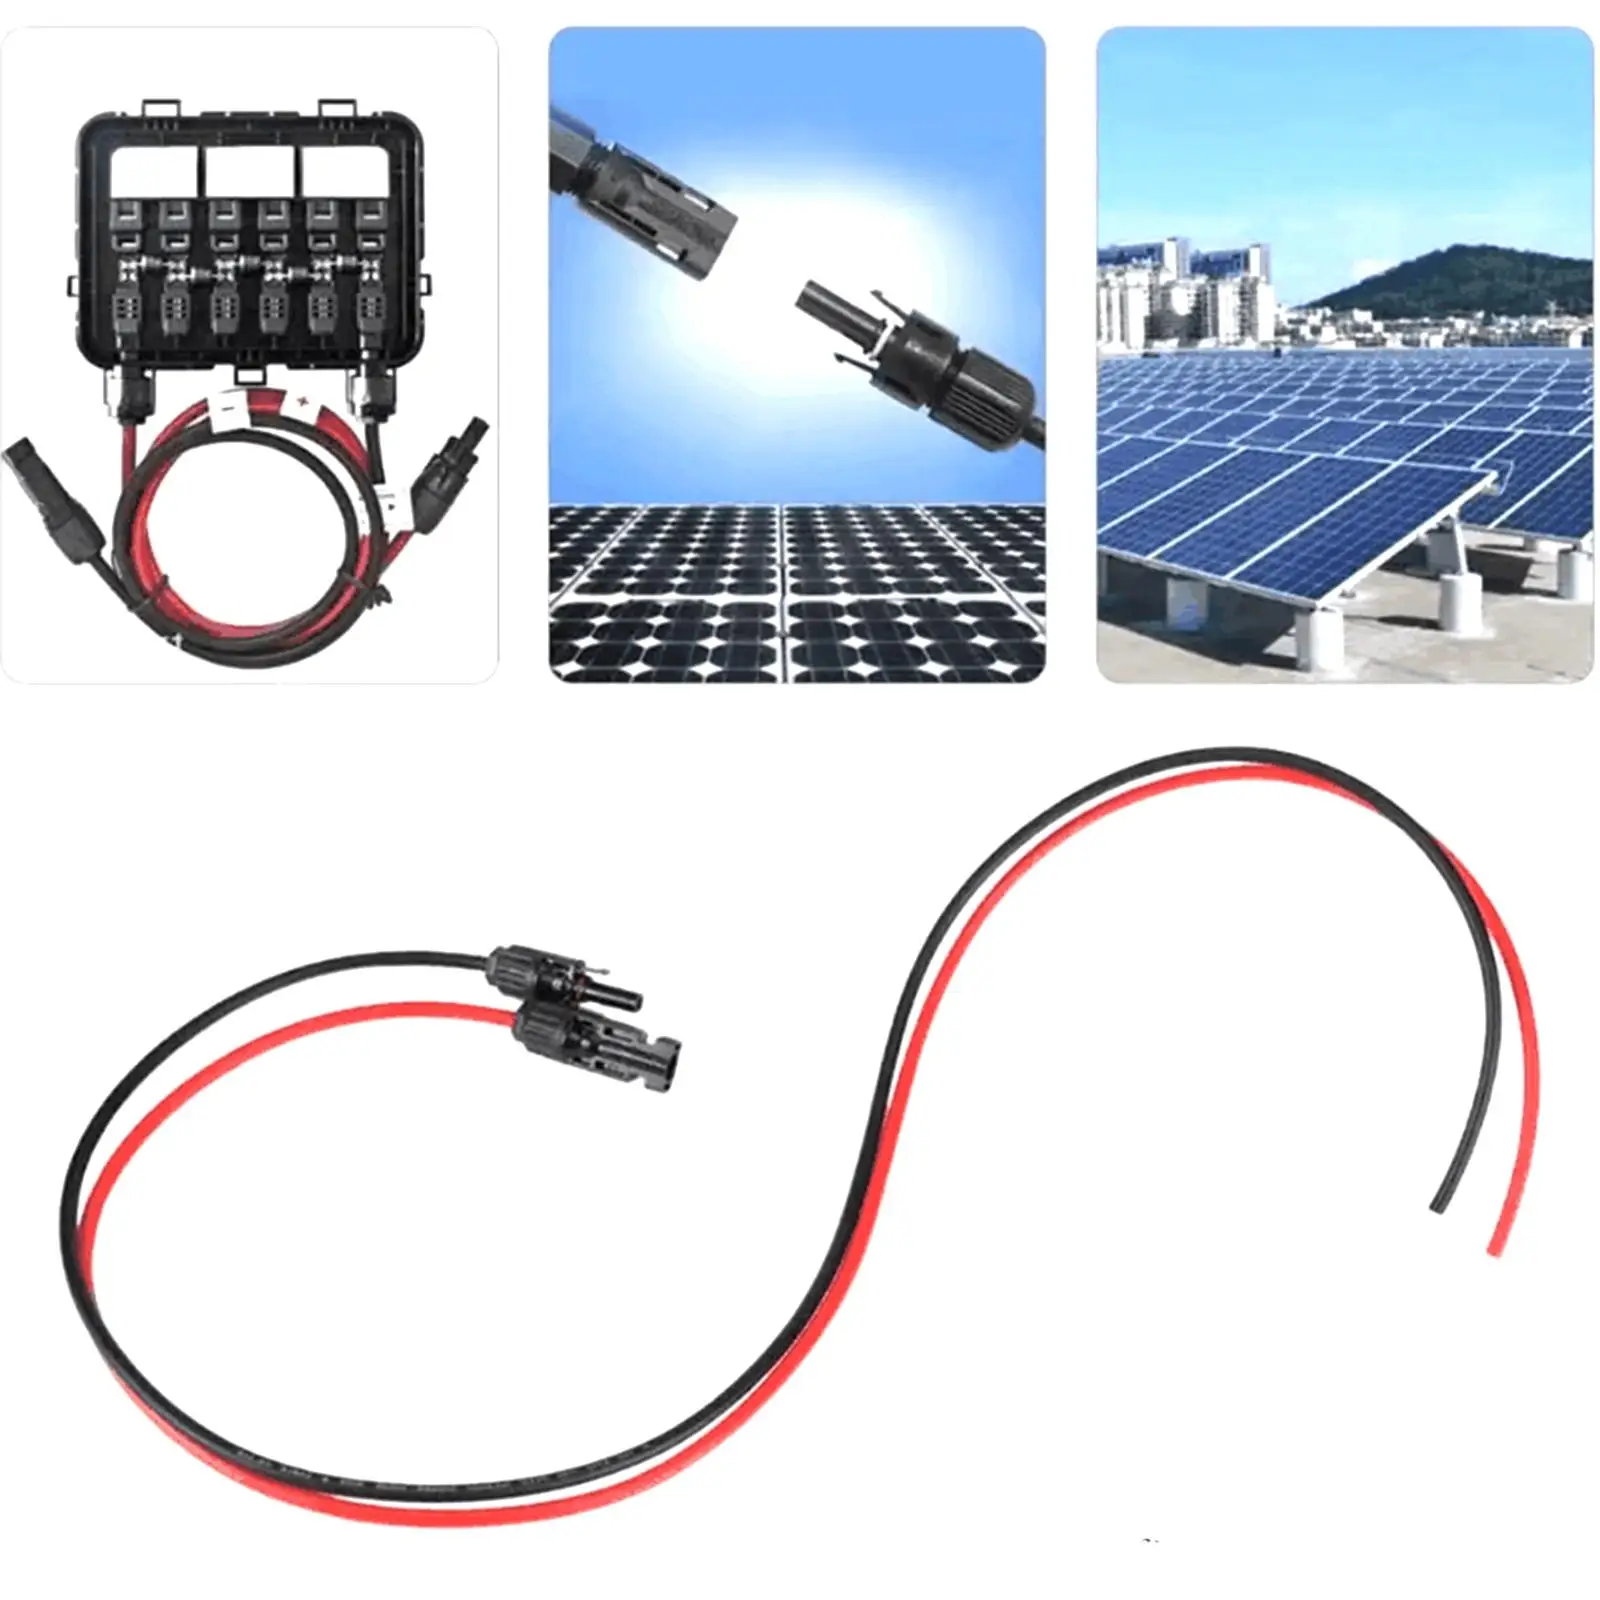 Solar Wire Extension Black Red Cords Female and Male Connector Connector Cable for Garden Yard Traveling Backpacking Camping